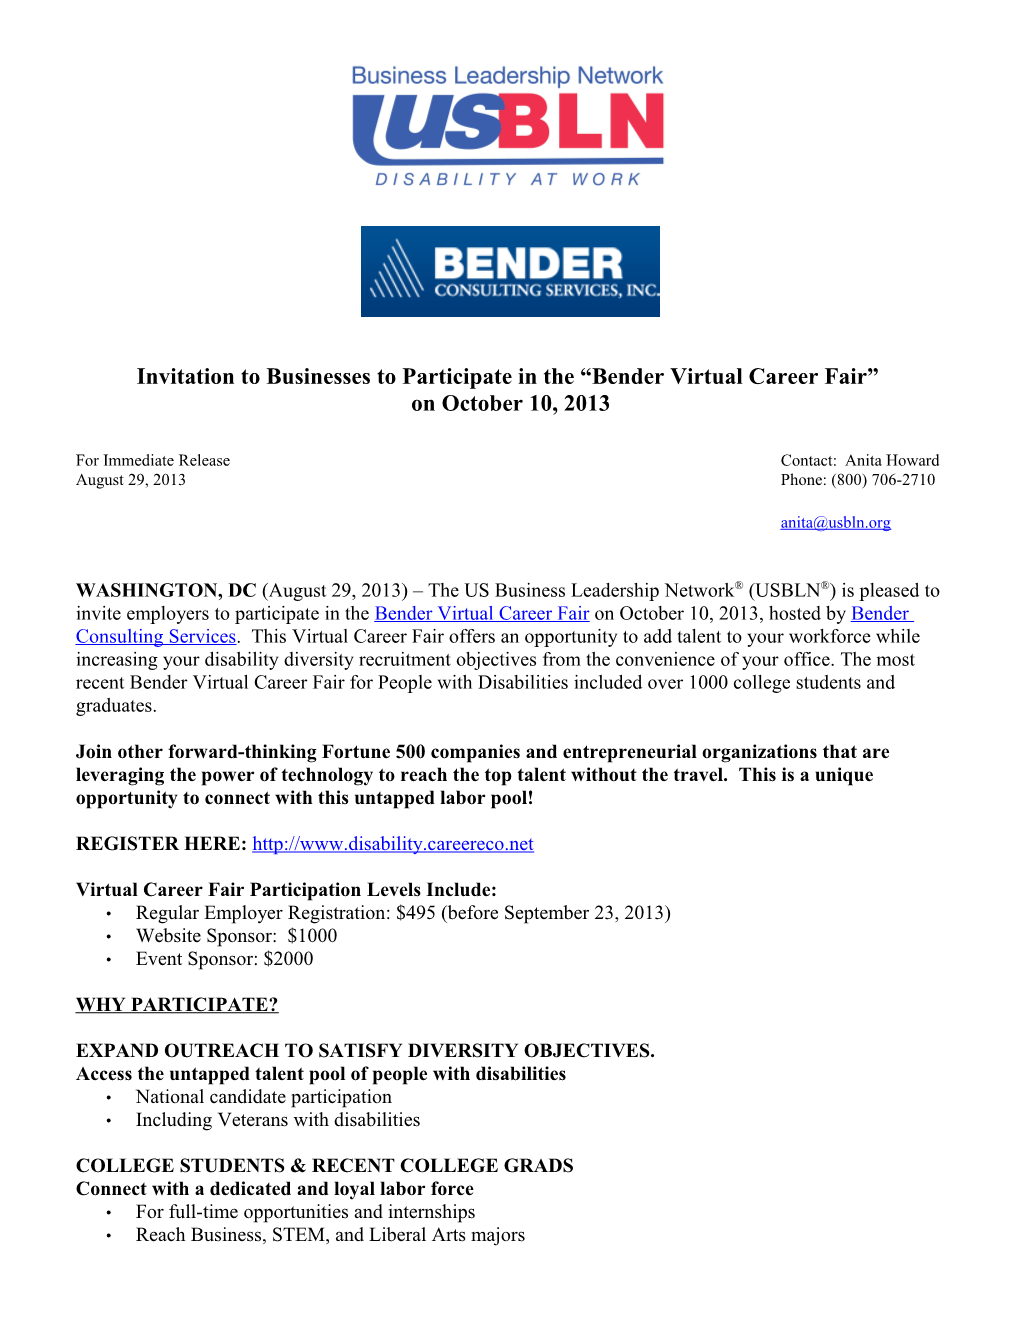 Invitation to Businesses to Participate in the Bender Virtual Career Fair